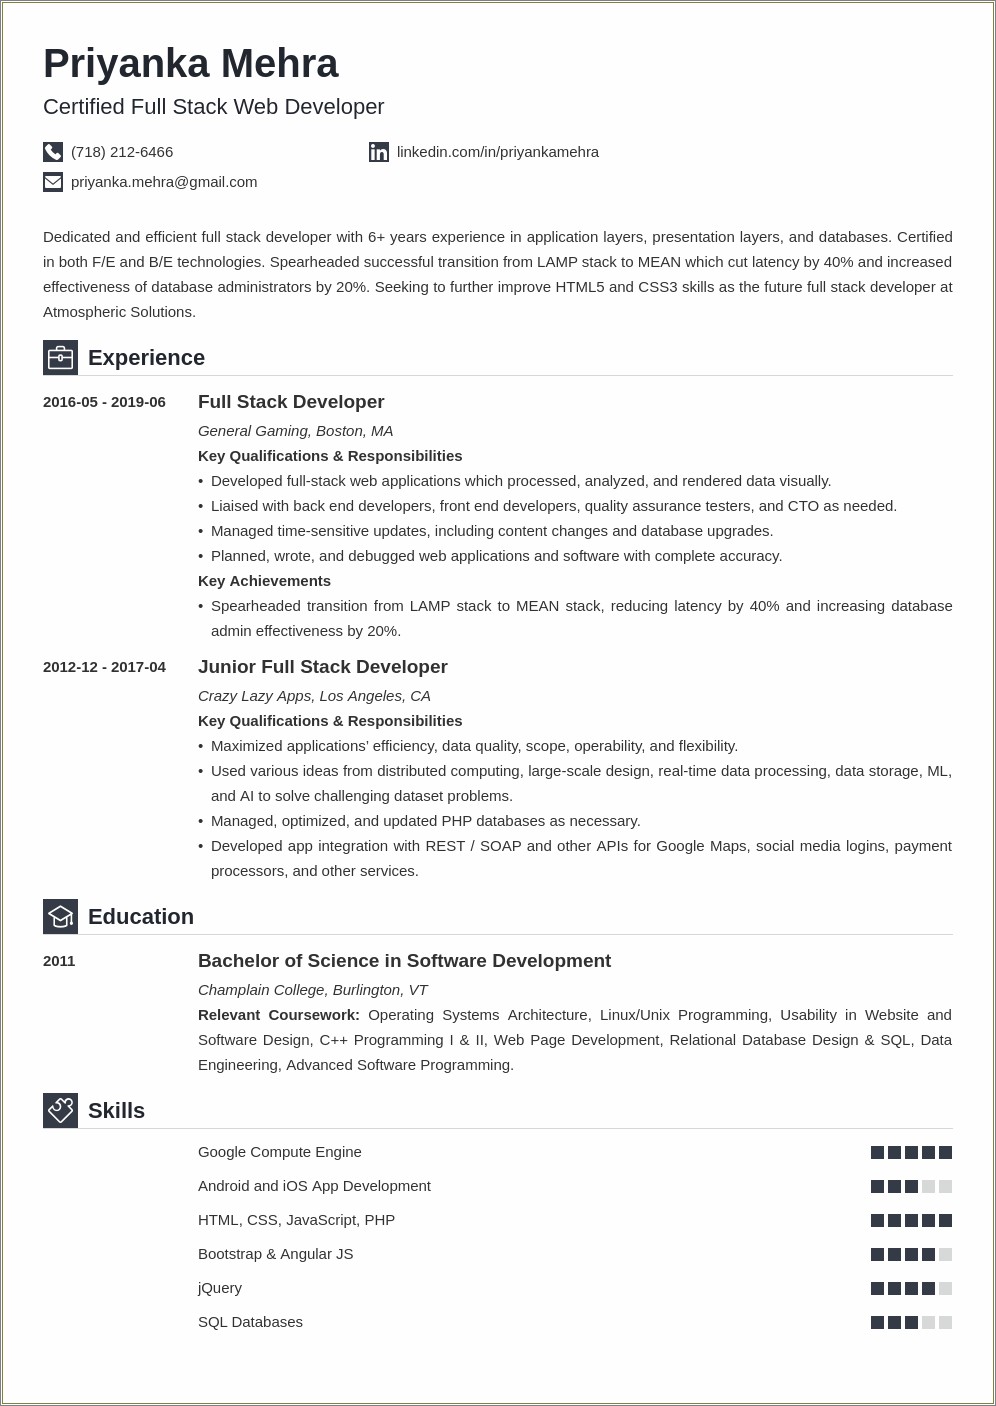 Resume Working For Designing And Developing A System